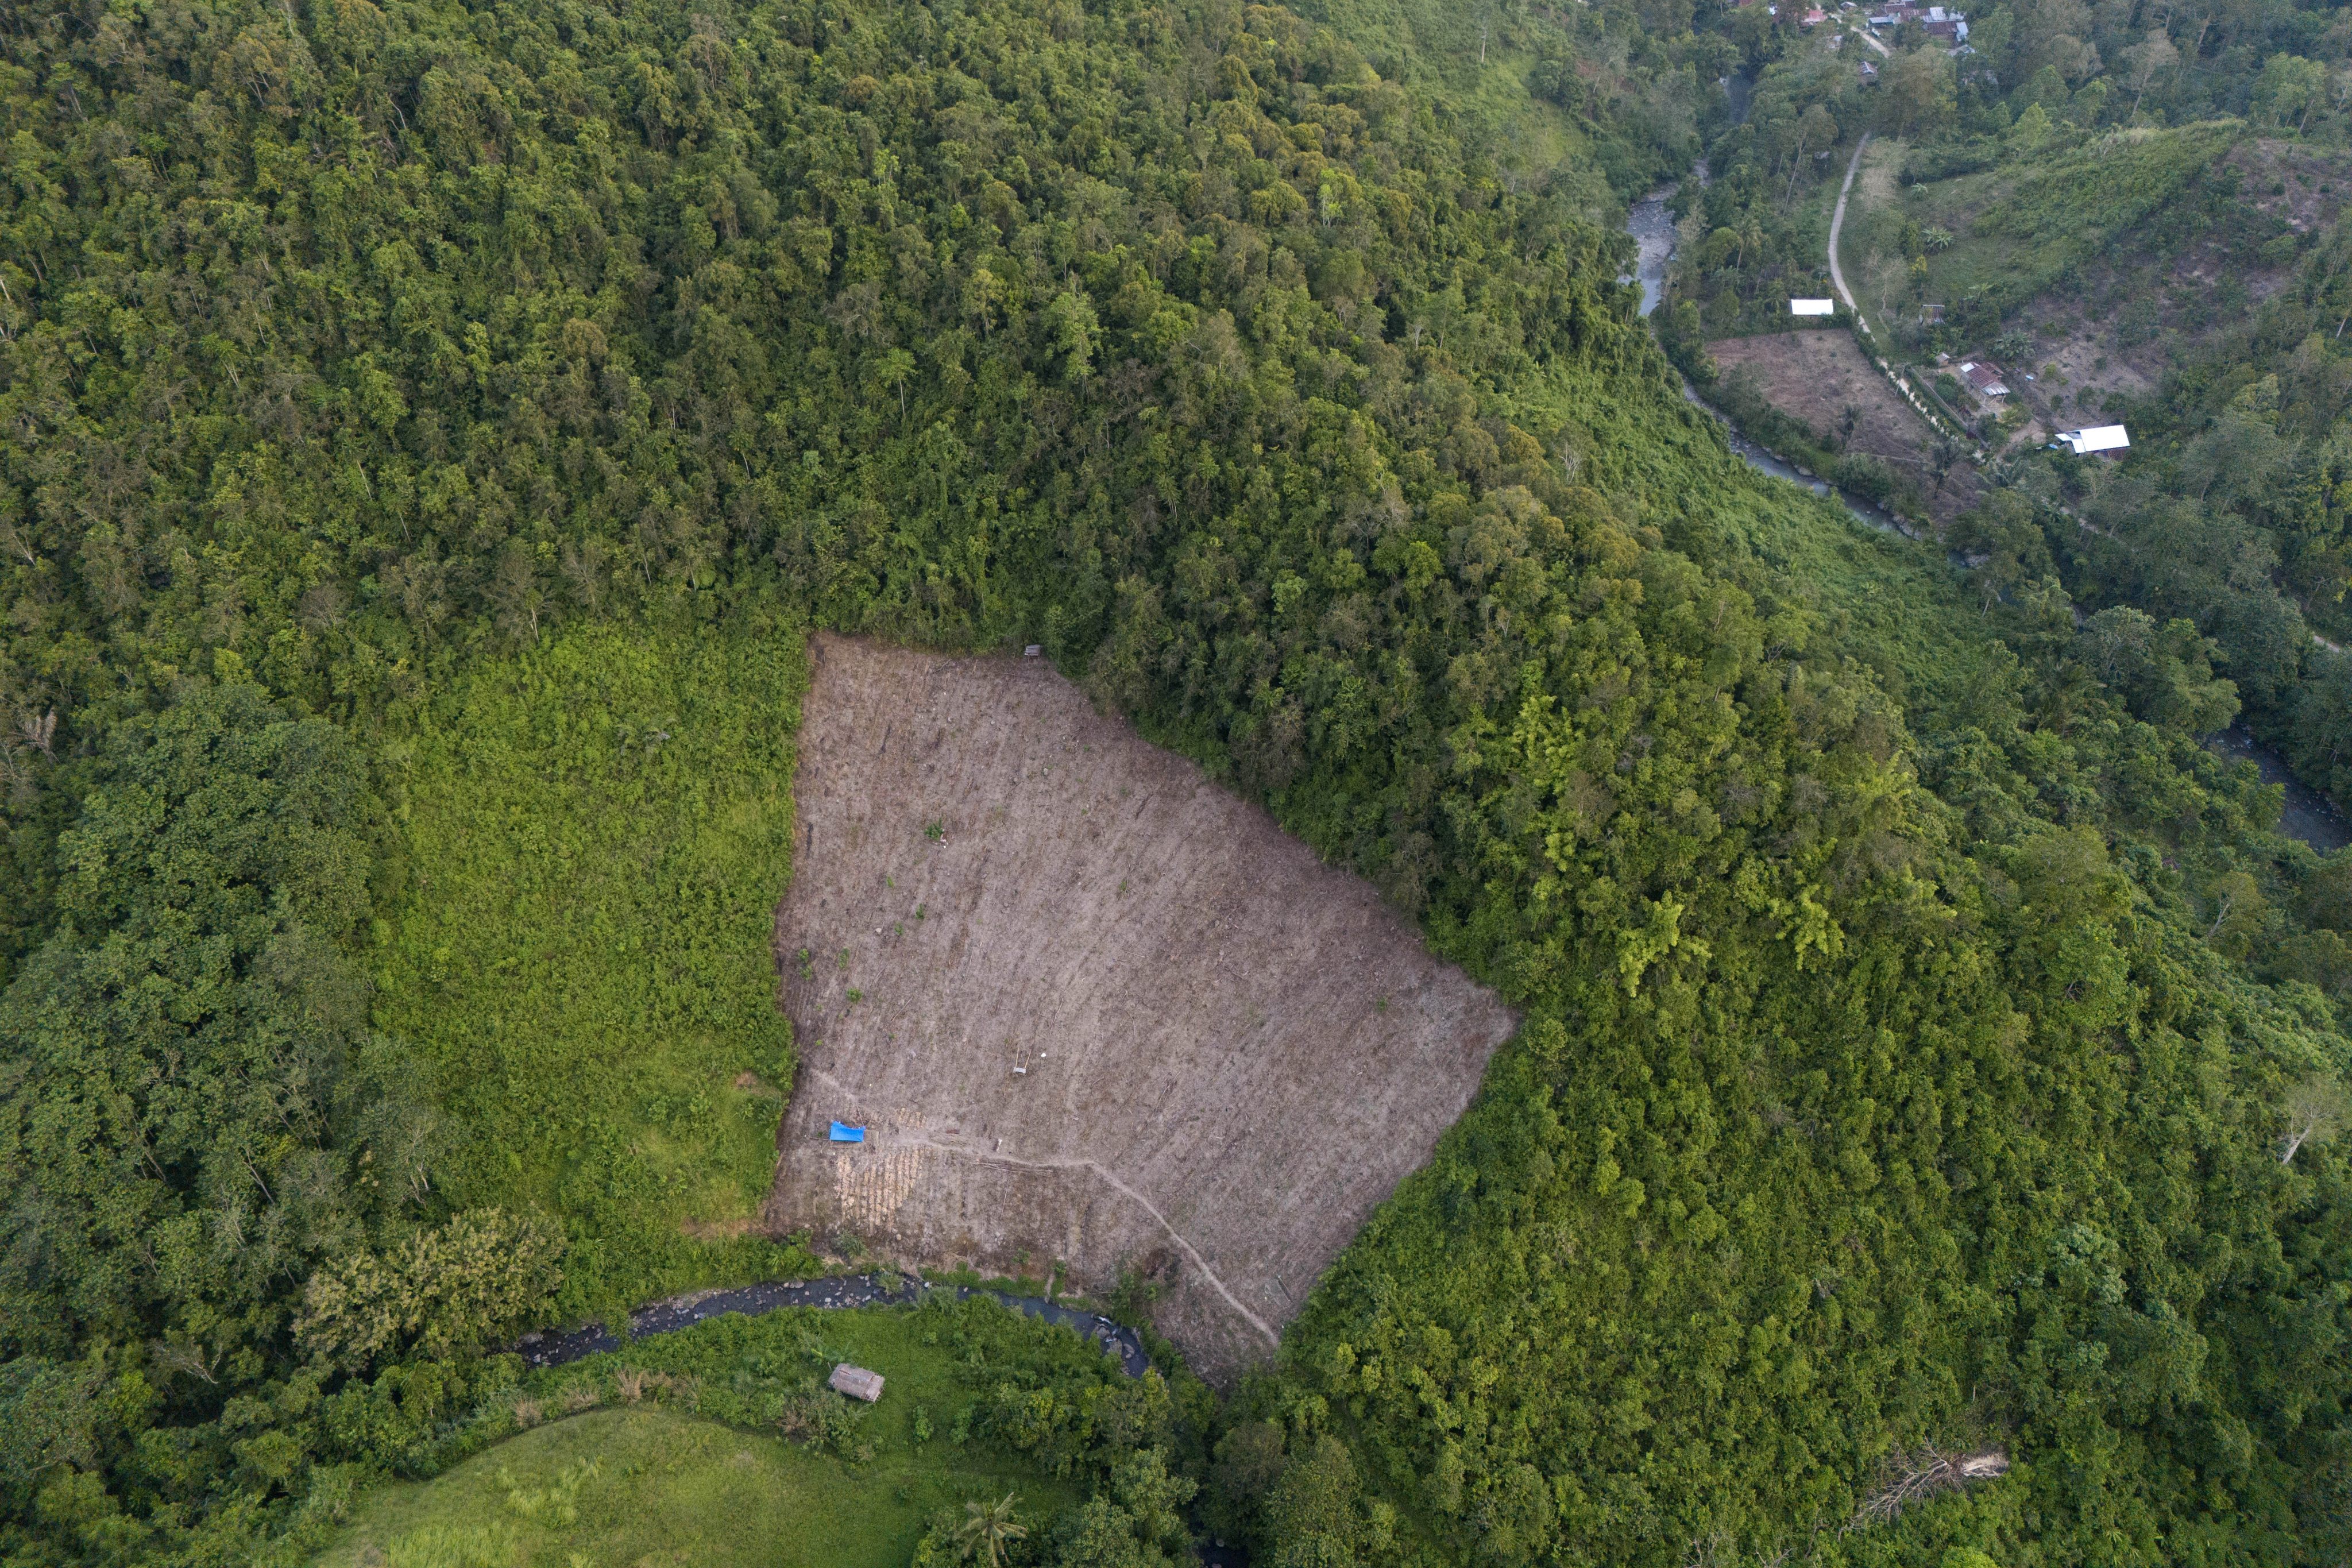 A swathe of cleared forest in Polewali Mandar, South Sulawesi, Indonesia. Photo: AP